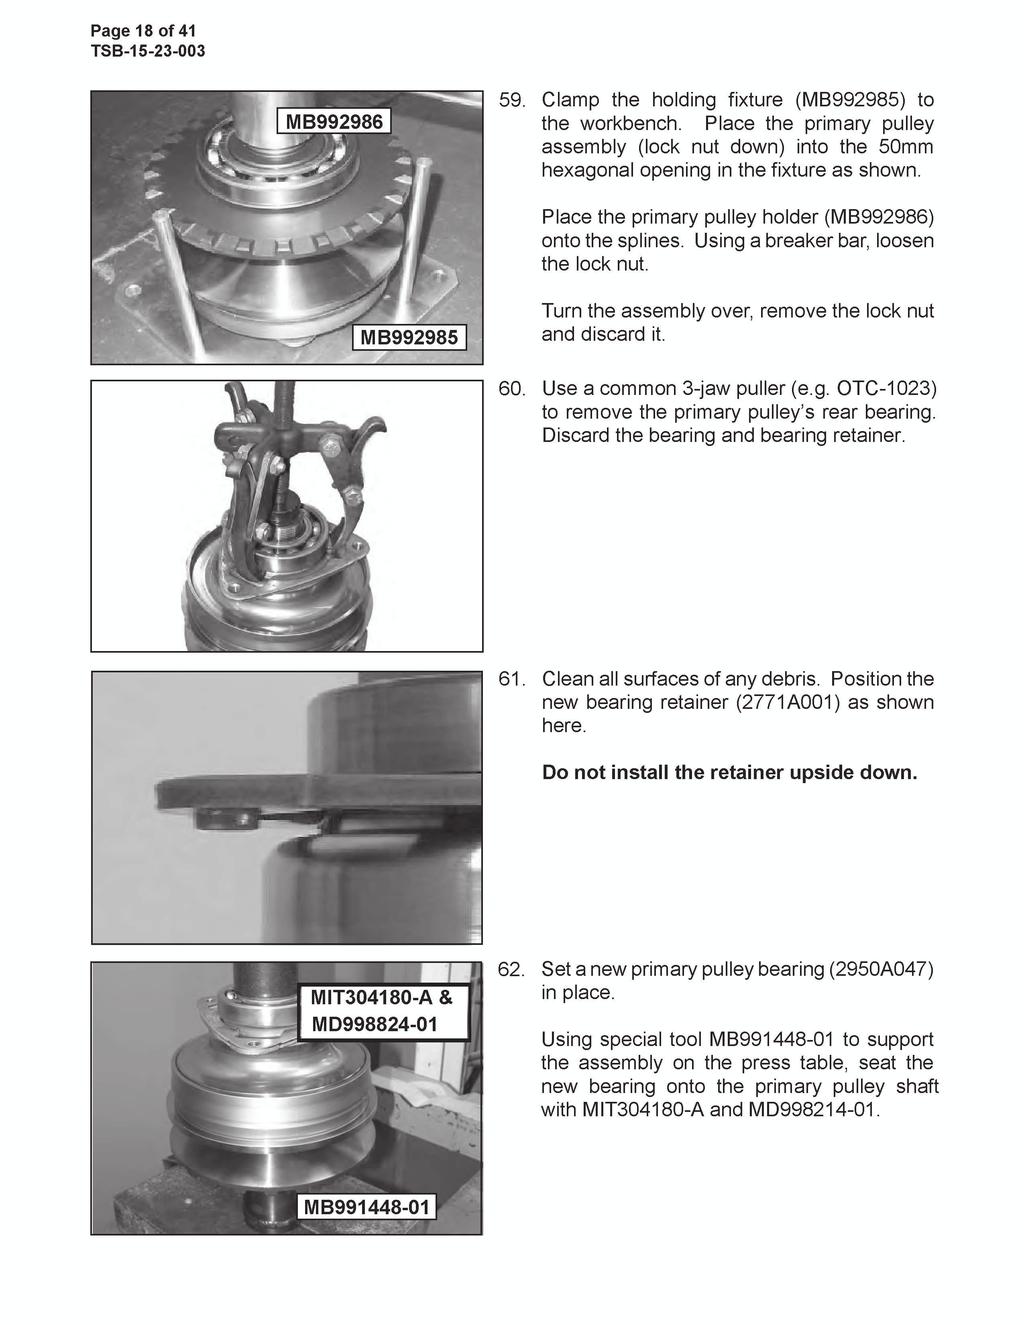 Page 18 of 41 59. Clamp the holding fixture (MB992985) to the workbench. Place the primary pulley assembly (lock nut down) into the 50mm hexagonal opening in the fixture as shown.